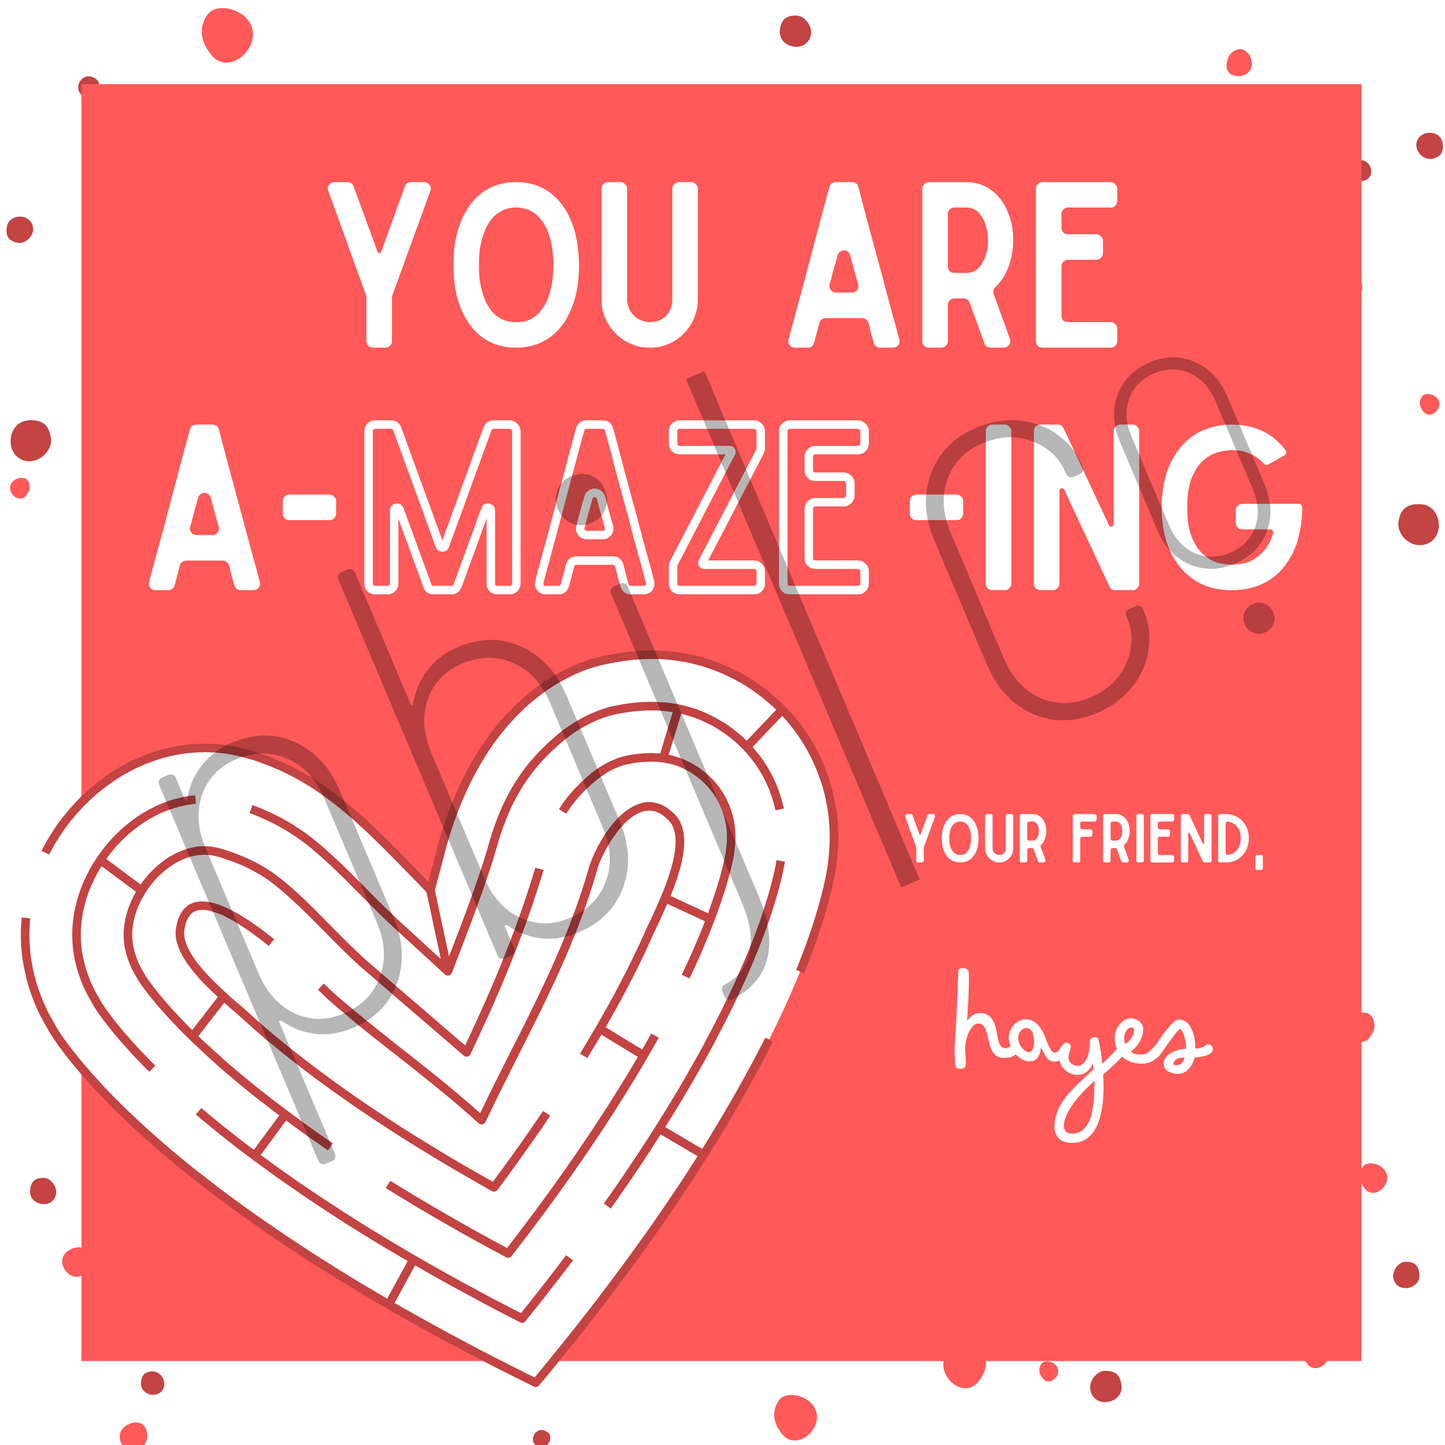 PRINTED Kids Customized Maze Valentine's Day Set of 24 Cards Favors Boy Girl Valentines Gift Tag With Envelopes Classroom Daycare Preschool Teacher